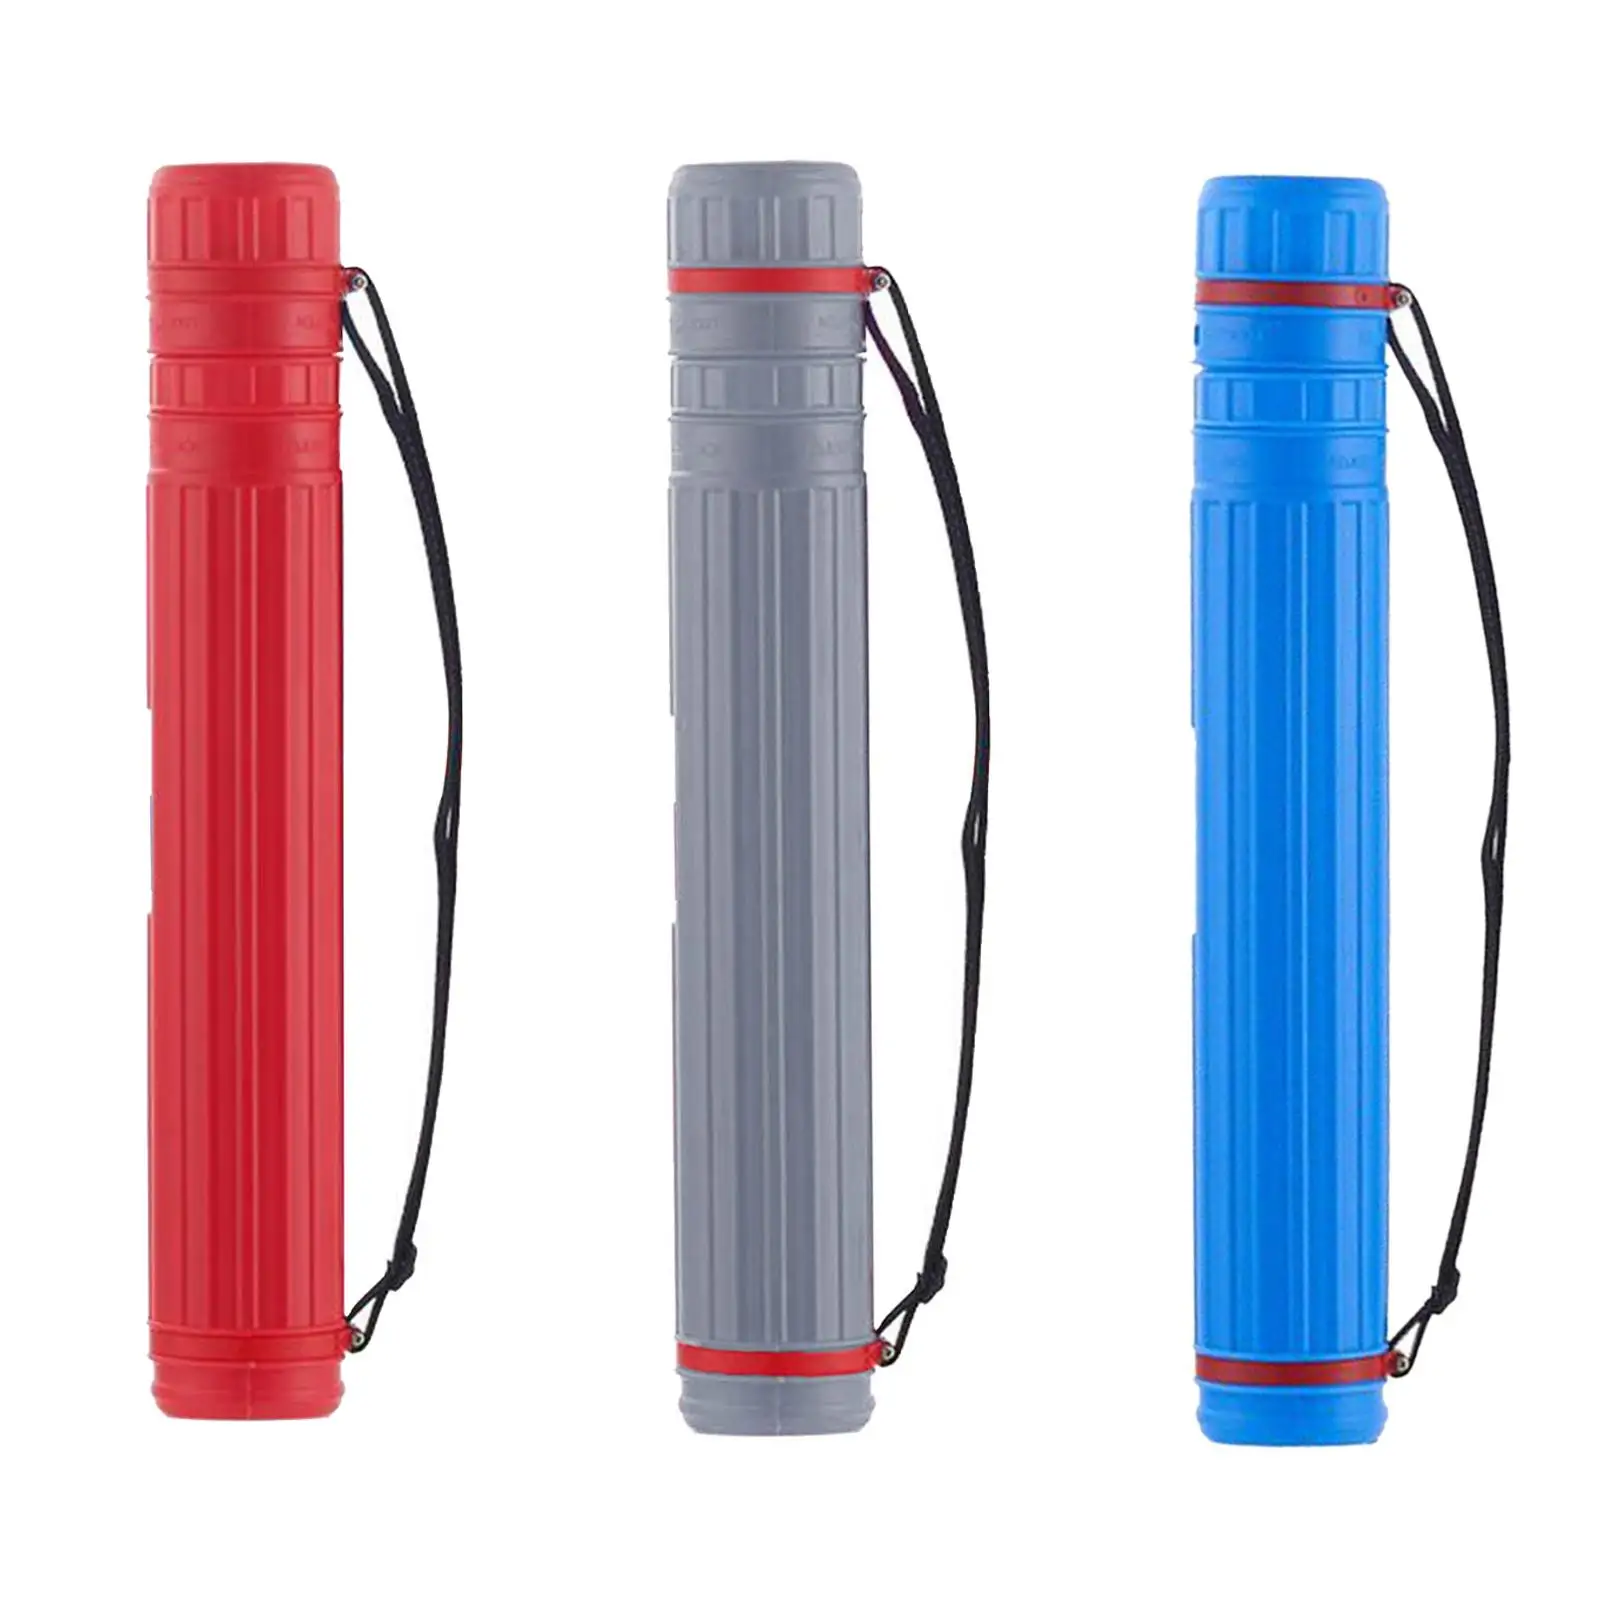 Poster Tube with A Carry Strap Expands from 17.7'' up to 28.3'' for Scroll